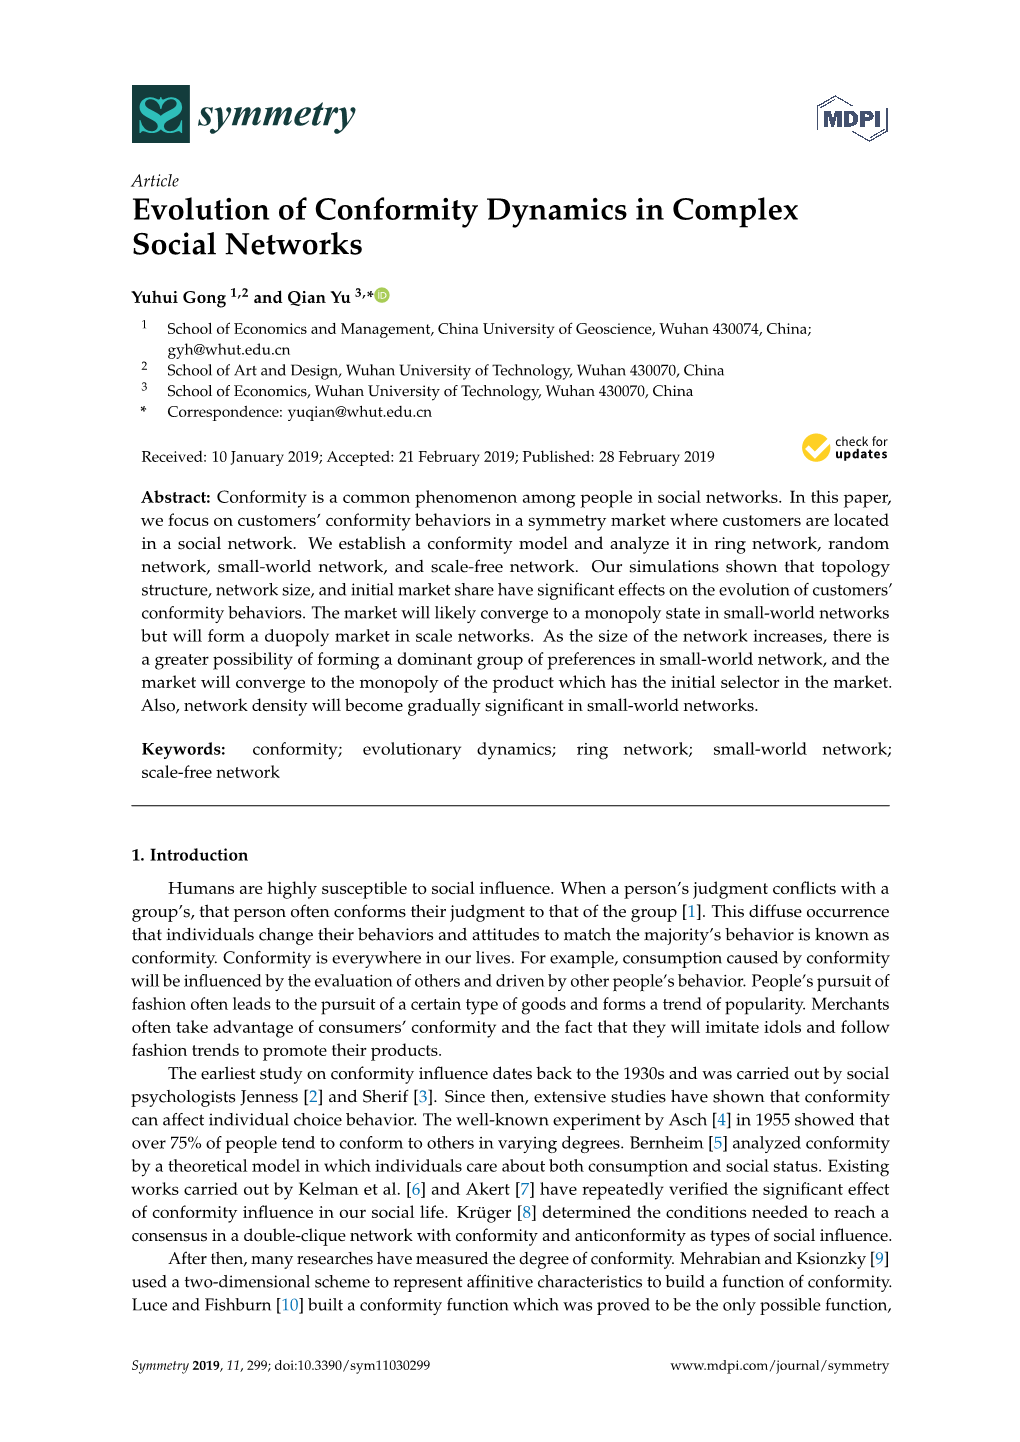 Evolution of Conformity Dynamics in Complex Social Networks